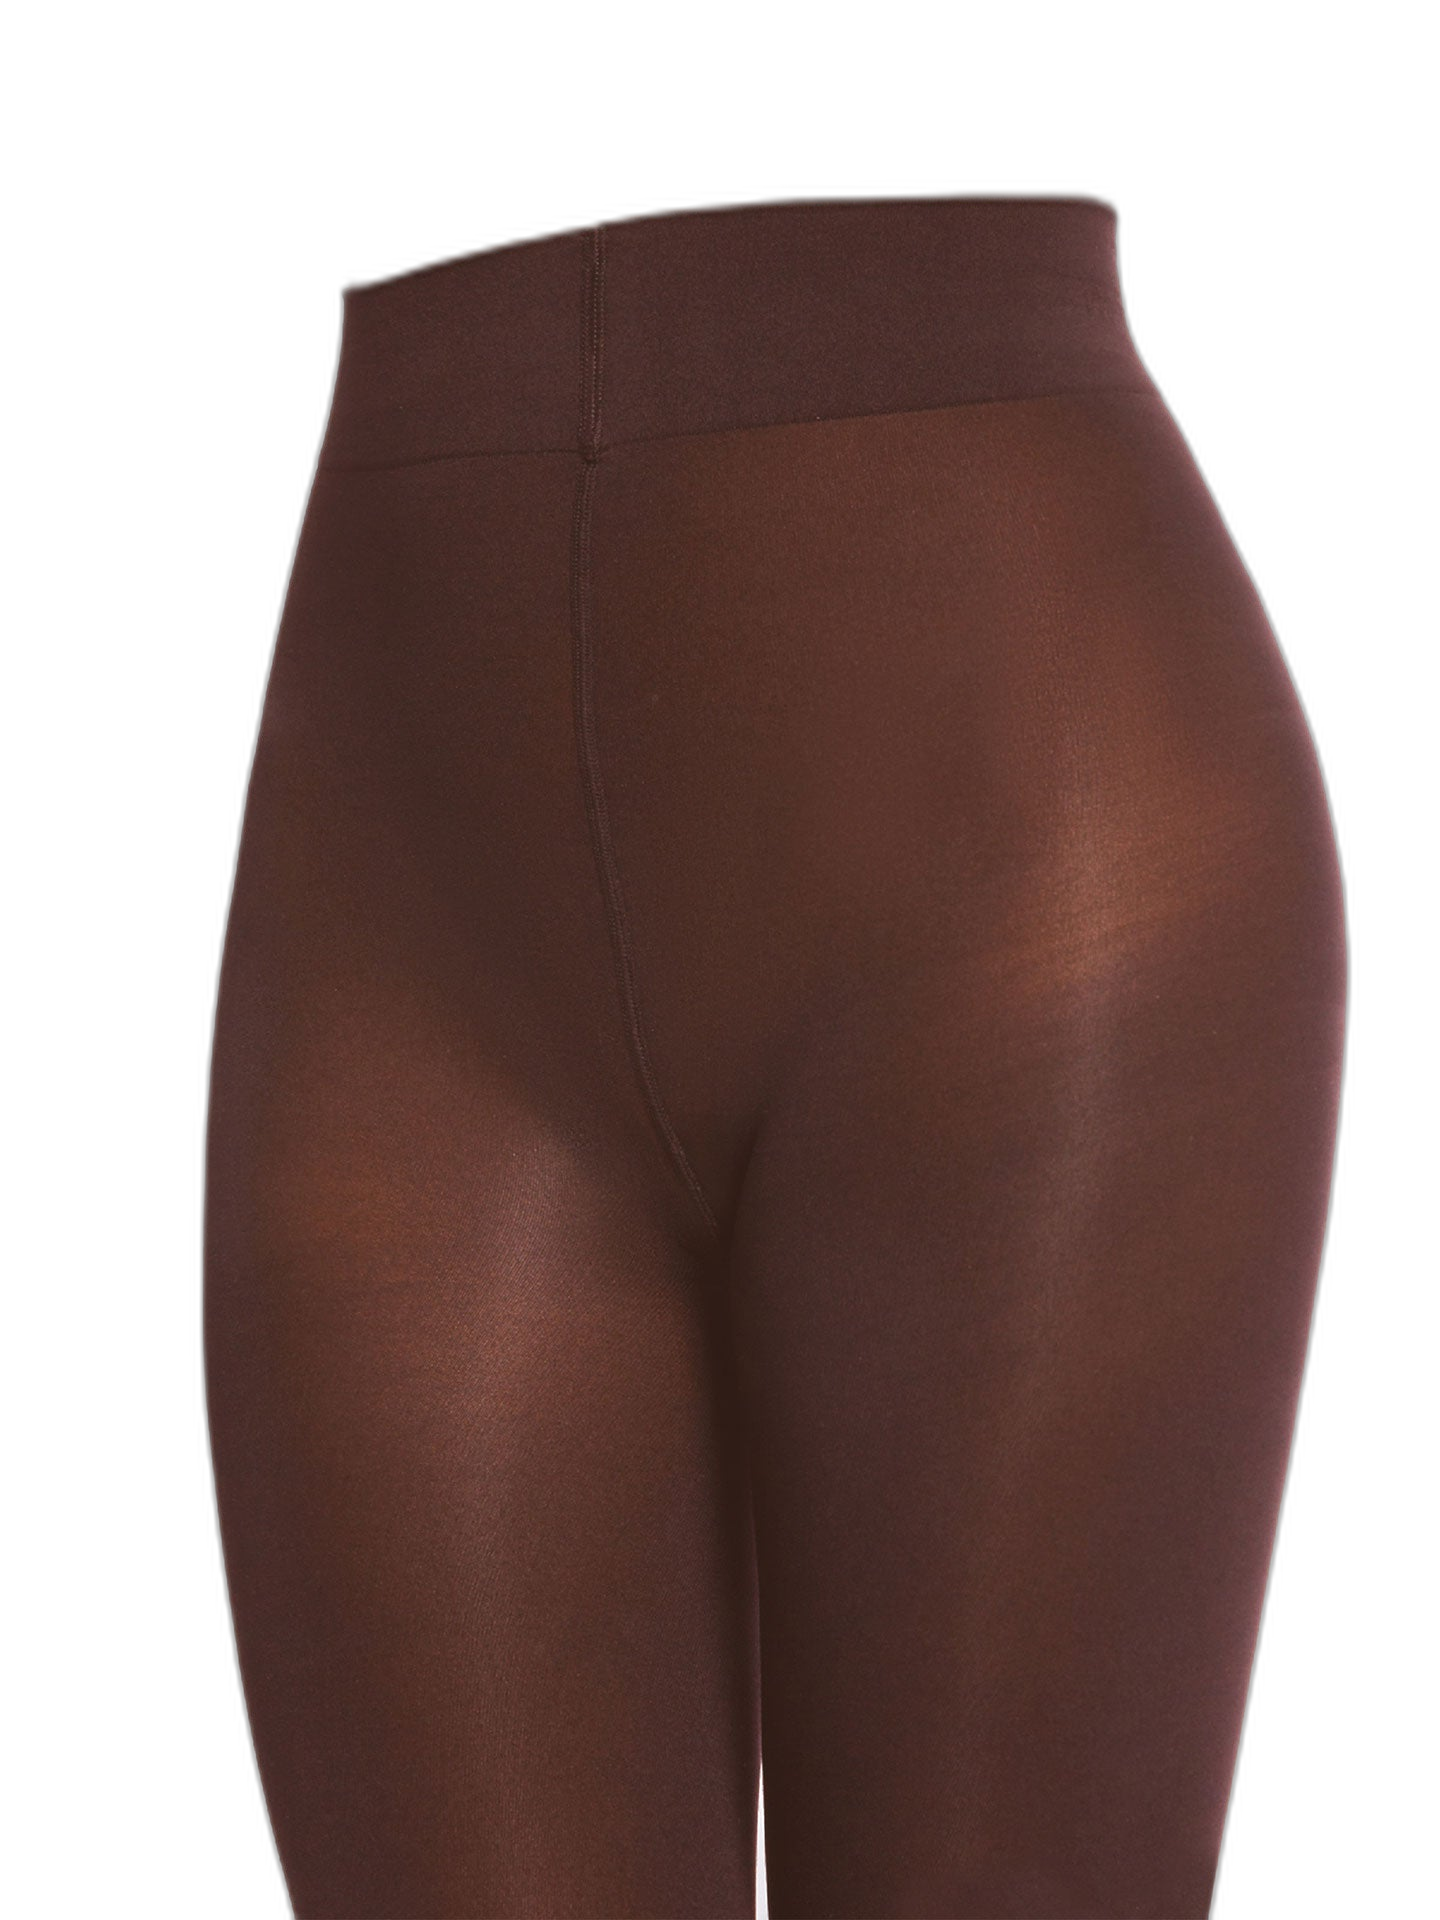 Wolford - Satin Touch 20 Comfort Coconut